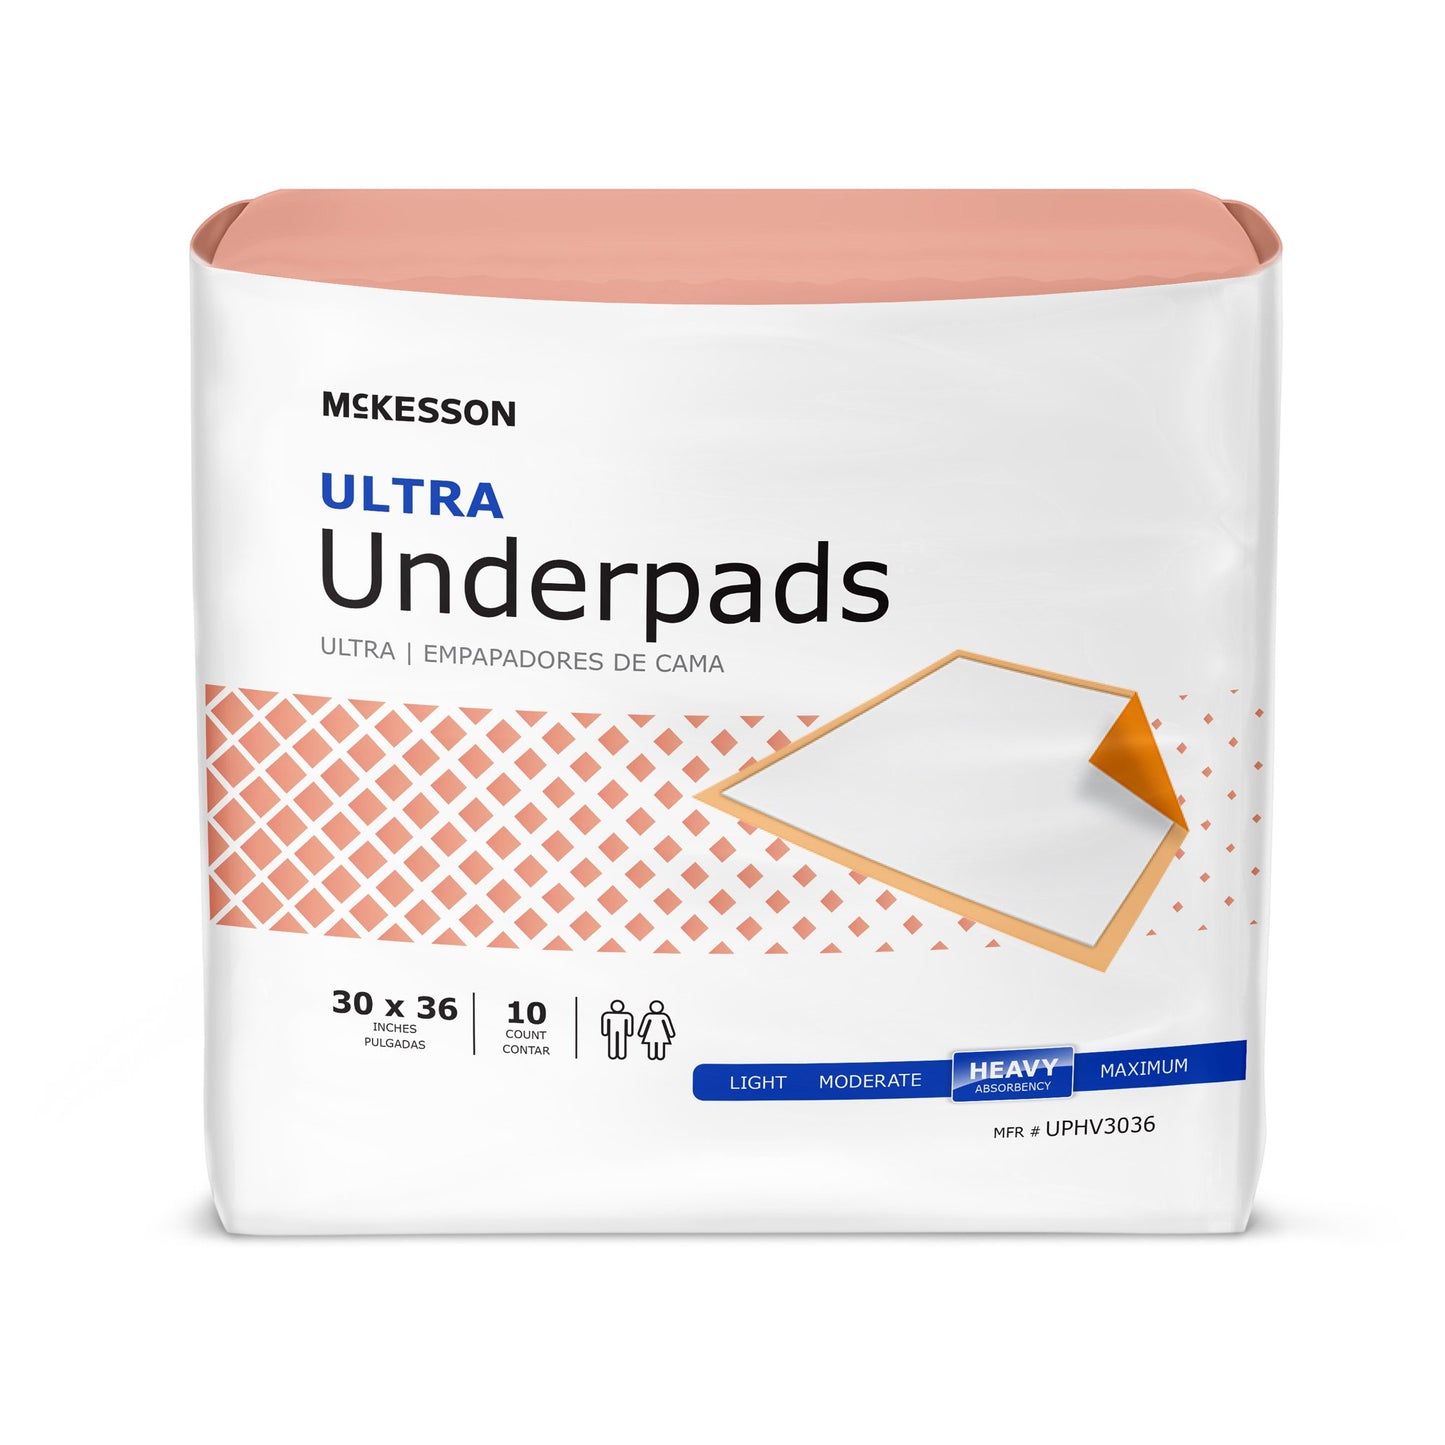 McKesson Ultra Heavy Absorbency Underpad, 30 x 36 Inch, 100 ct